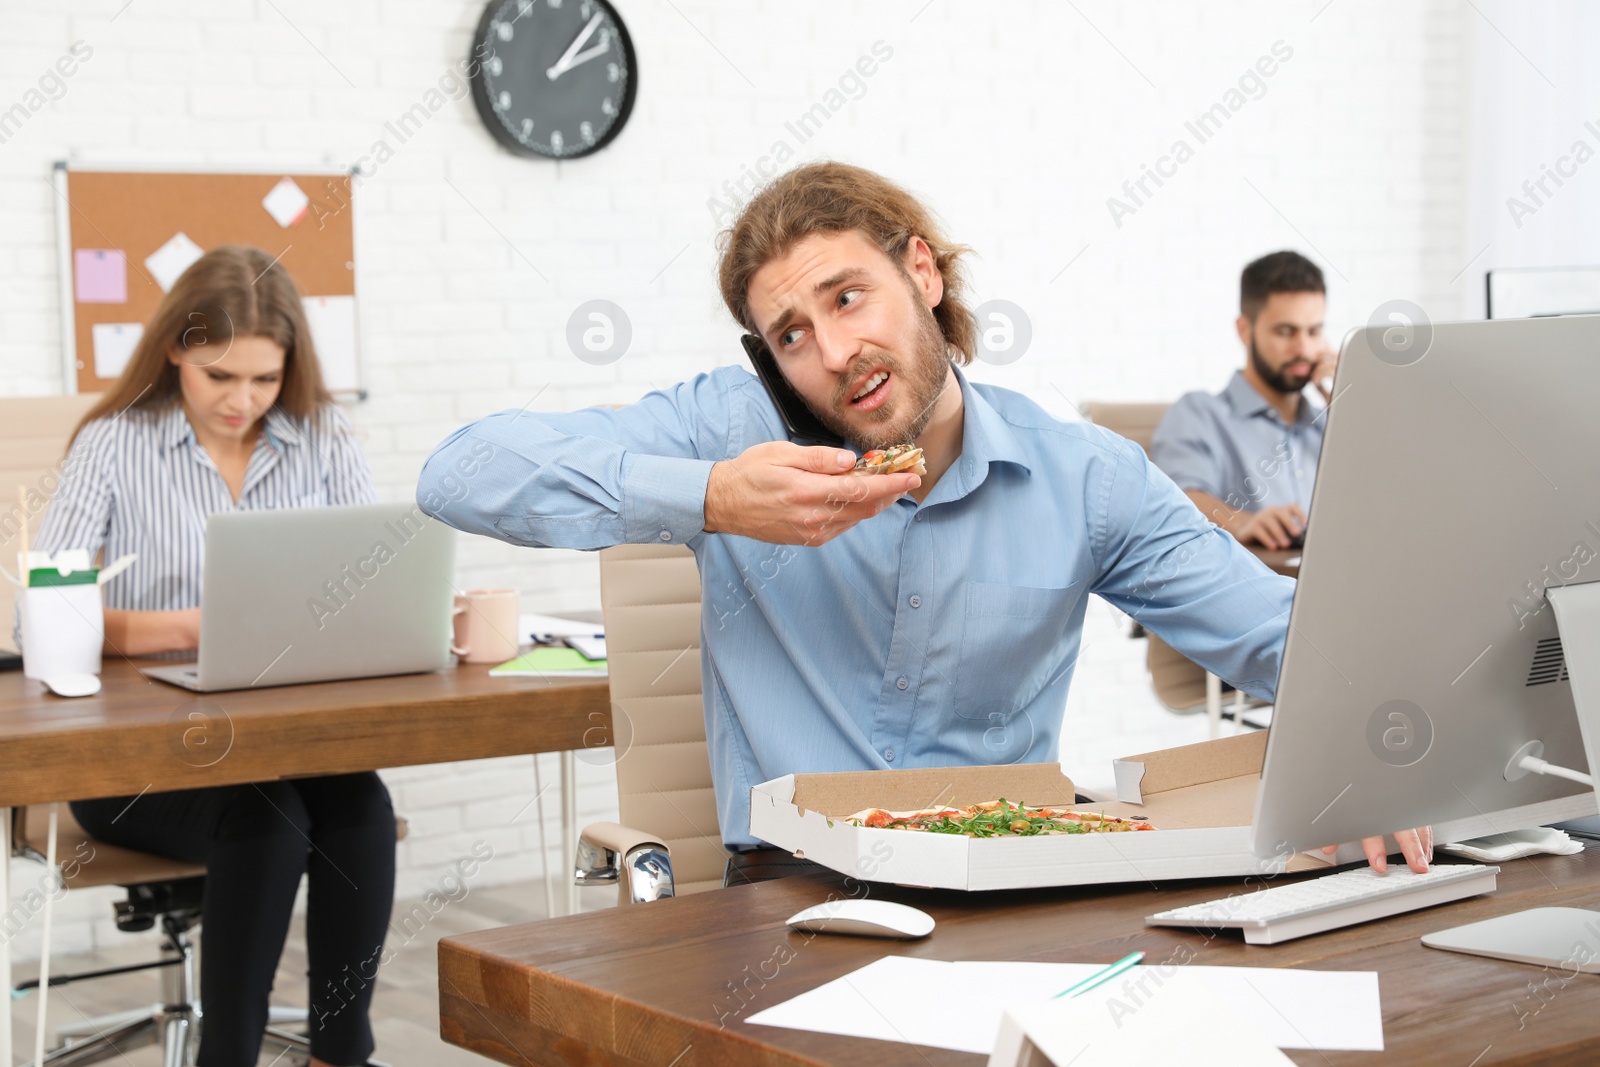 Photo of Office employee having pizza for lunch while talking on phone at workplace. Food delivery